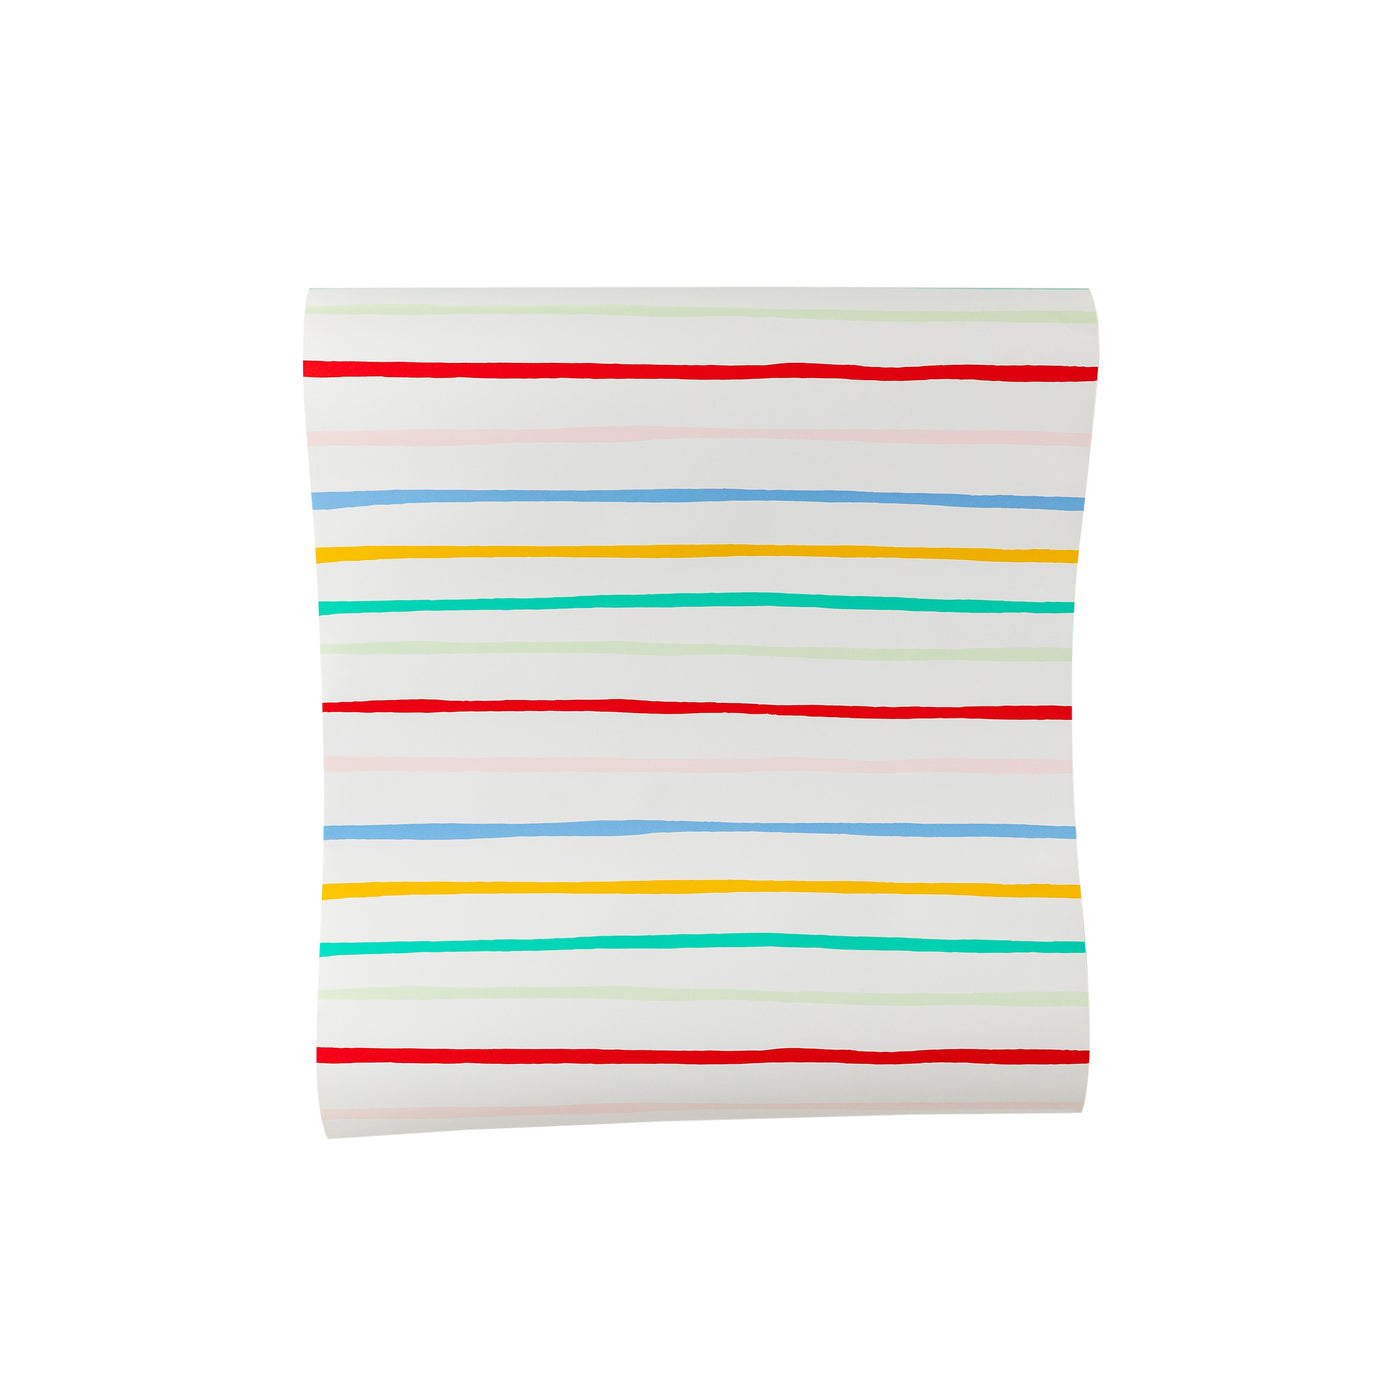 Oui Party Striped Table Runner